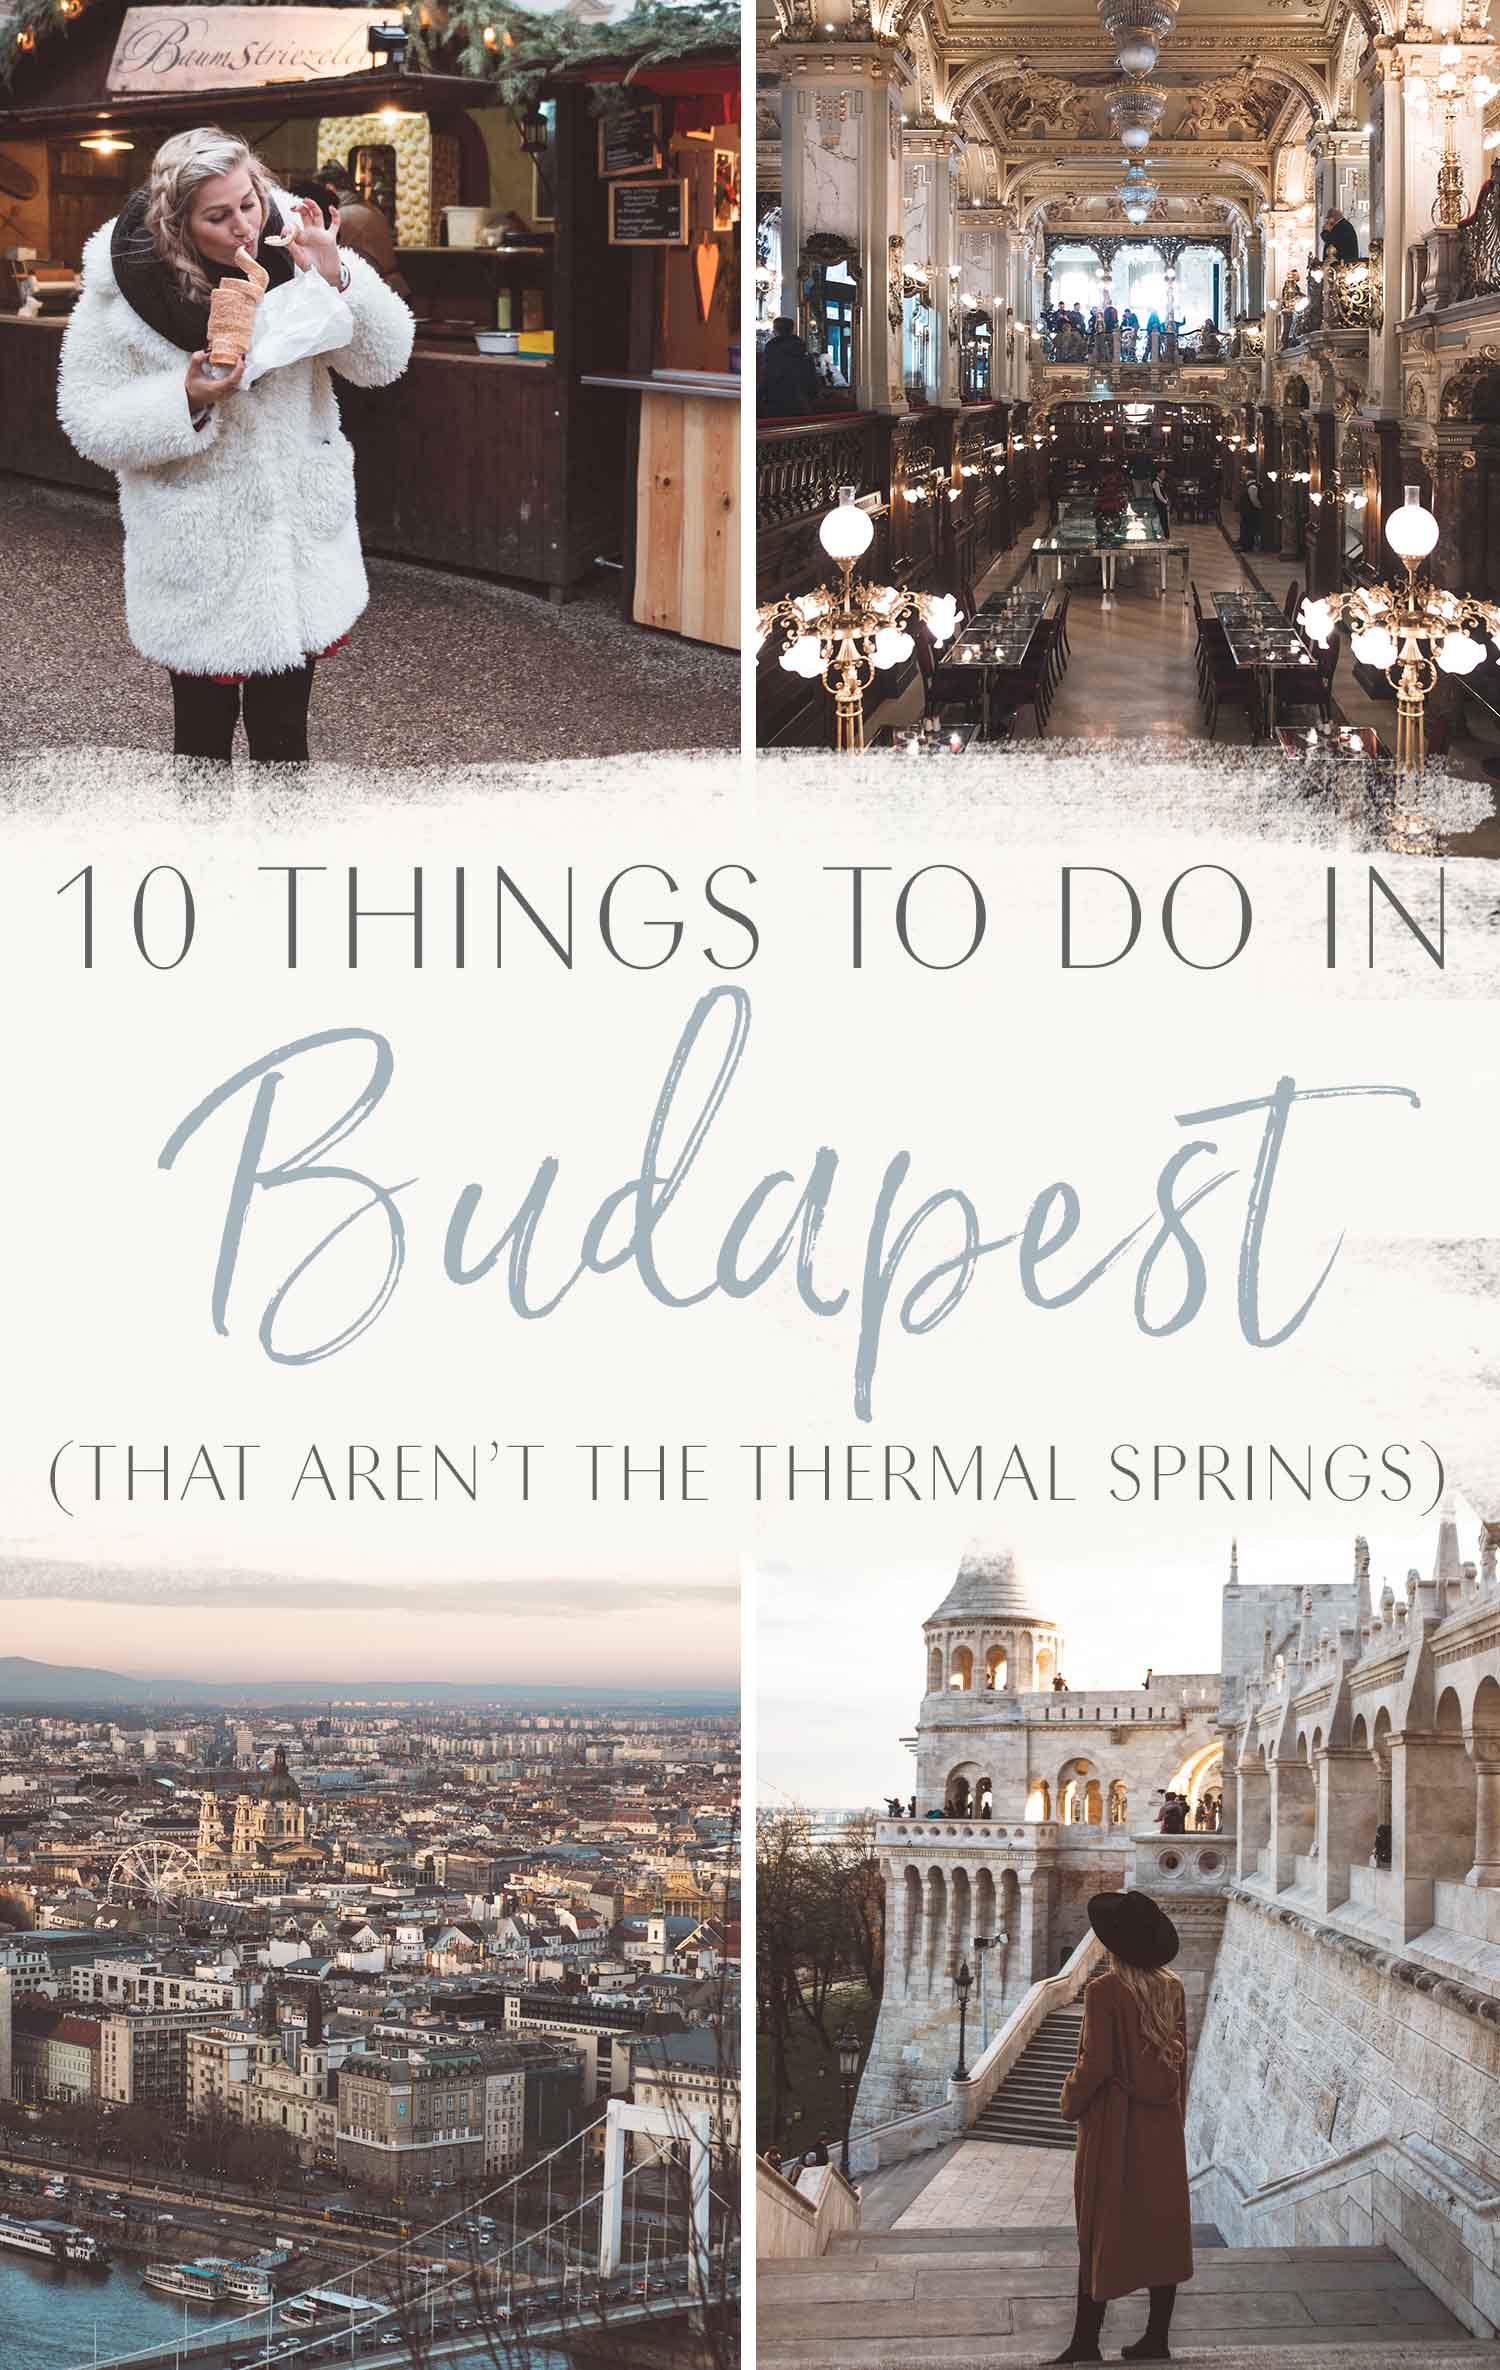 10 Things to Do in Budapest